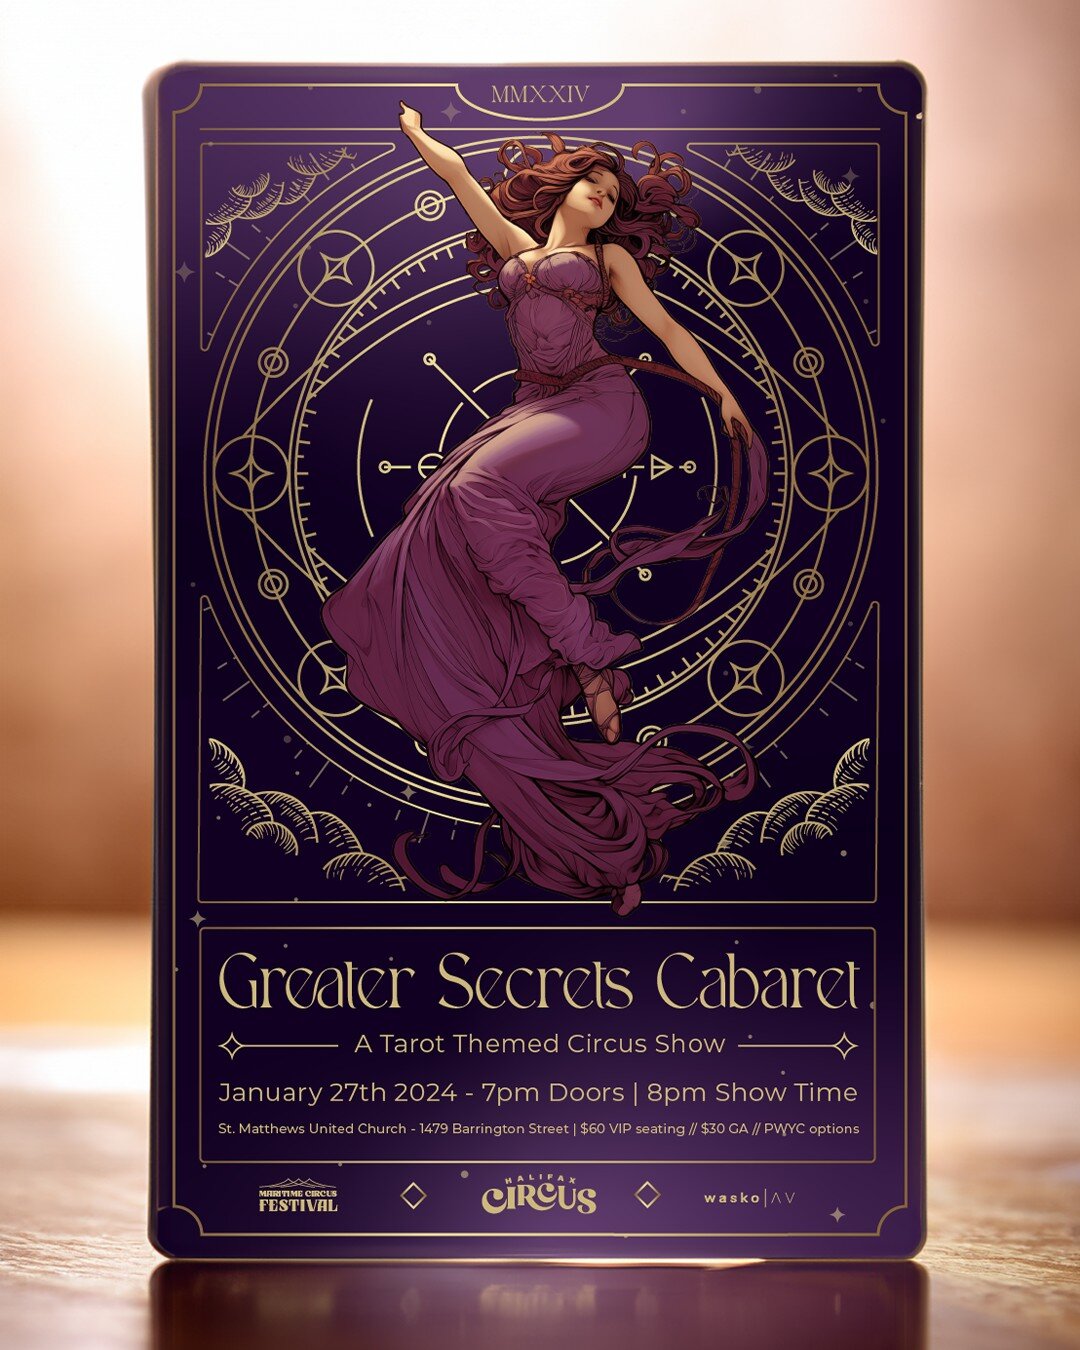 ✨✨Tickets are now LIVE for Greater Secrets Cabaret; A Tarot Inspired Contemporary Circus Show✨✨
👆Ticket Link in bio 👆

AGAIN! We're trying it again, but this time outside of Hurricane Season 👍

In the beauty of the 250-year-old St. Matthew&rsquo;s